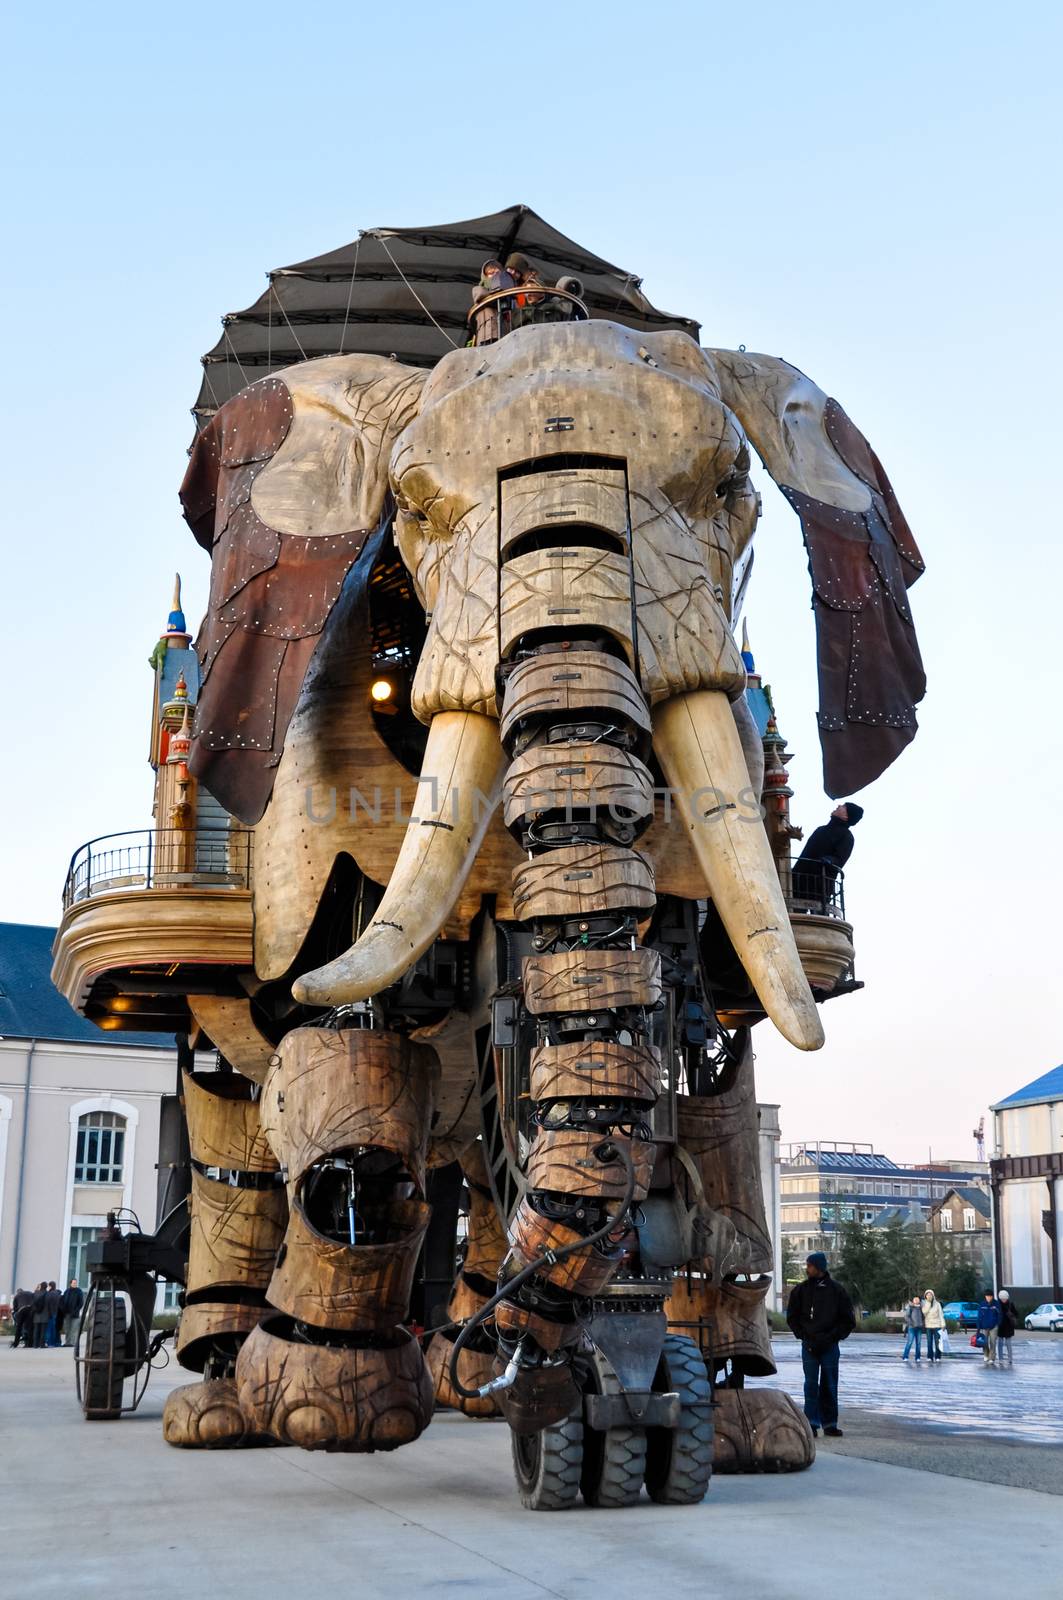 NANTES, FRANCE - CIRCA DECEMBER 2009: The Great Elephant goes for a walk with passengers aboard.